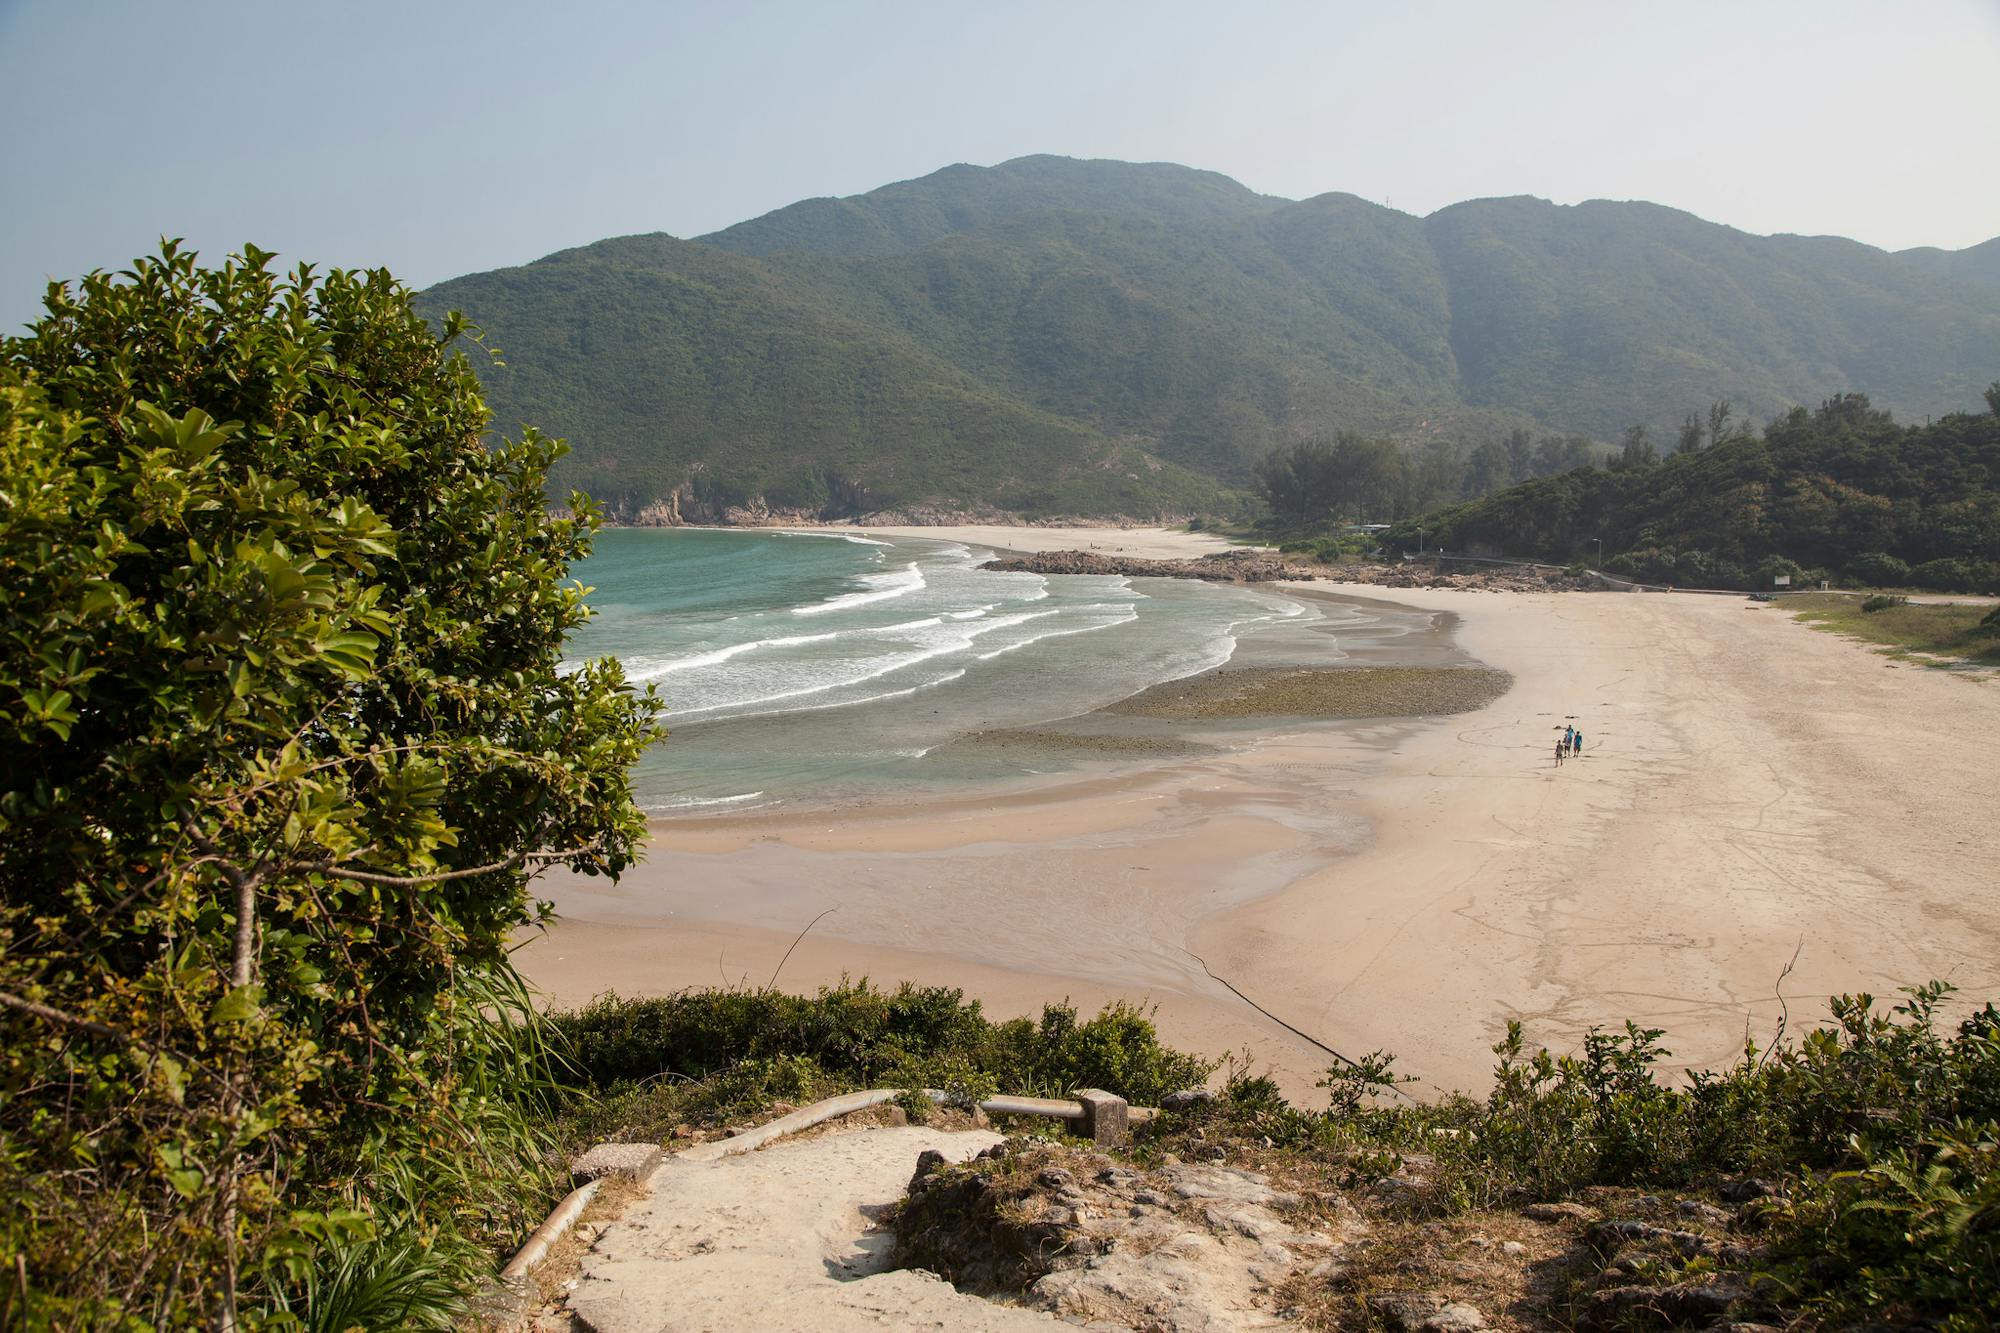 Tai Long Wan Beach from the other side